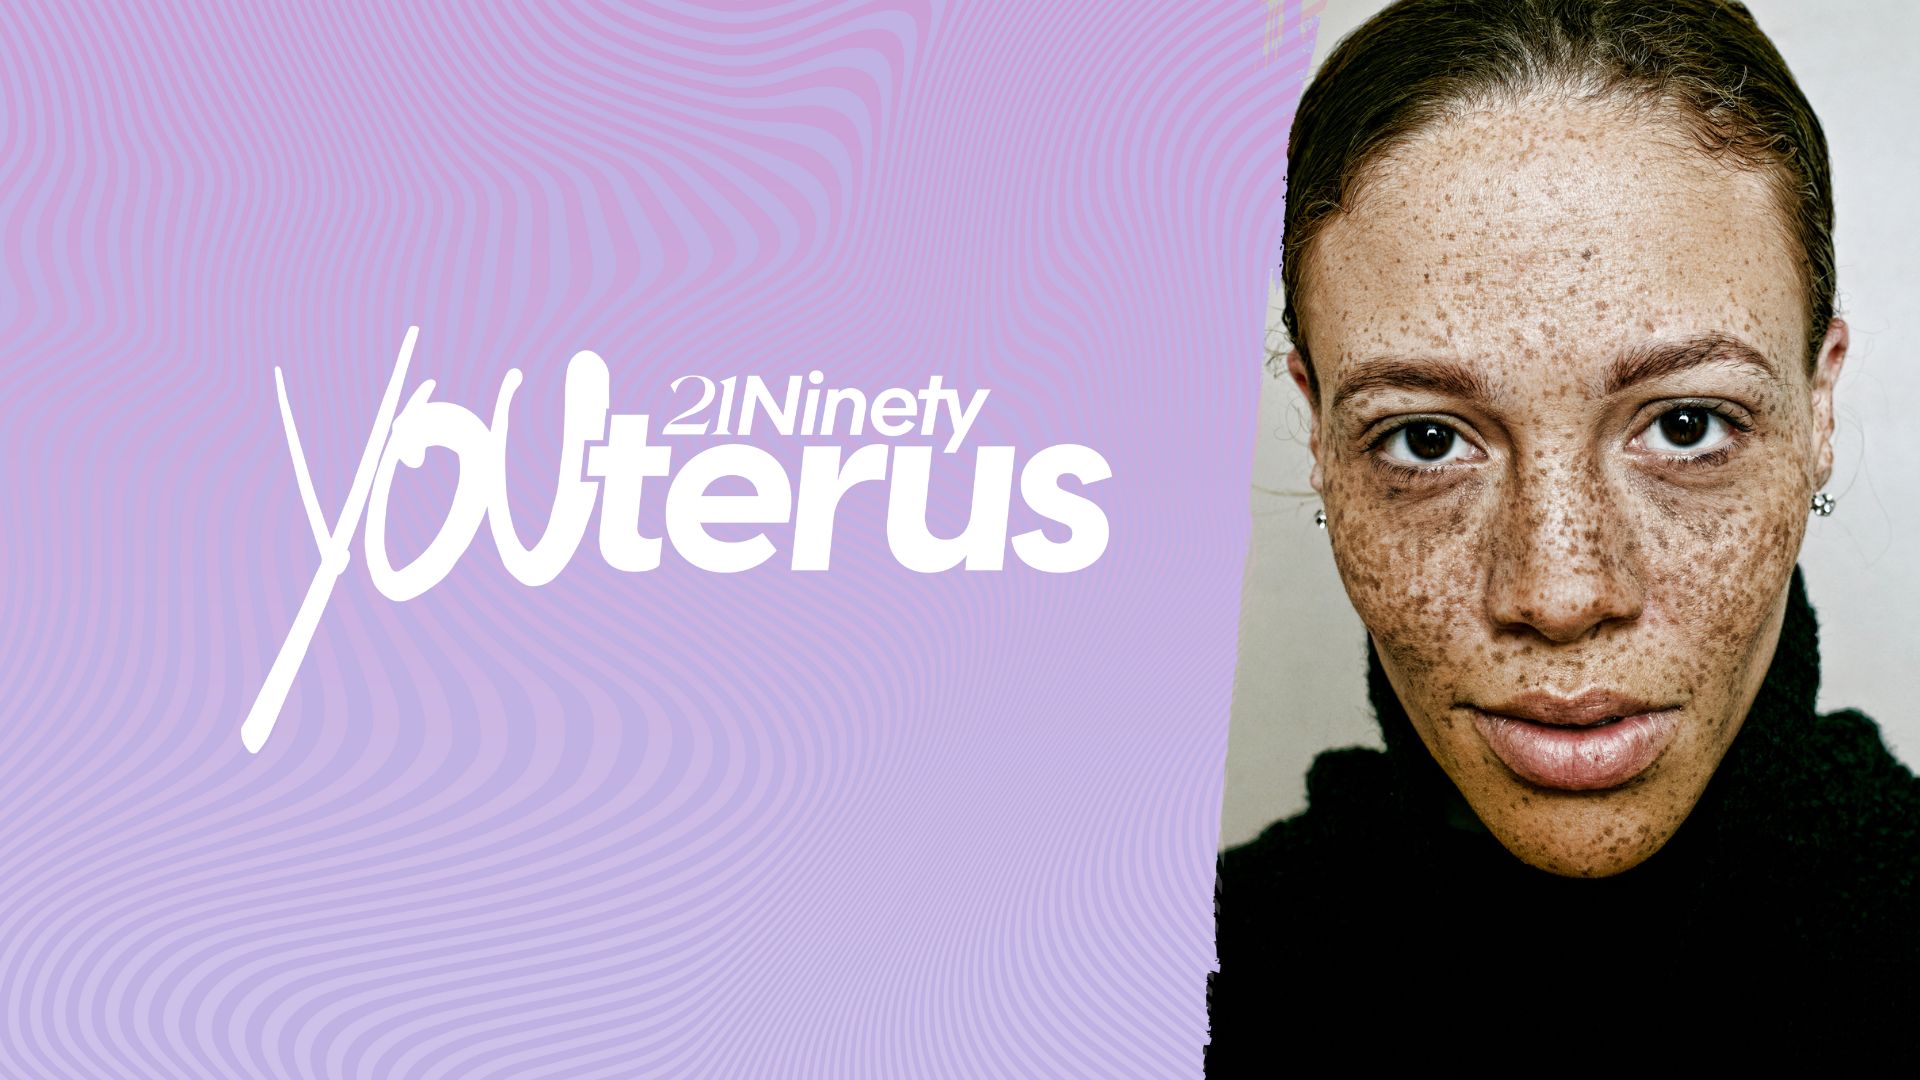 From the Editor: Unpacking Uterine Issues with 21Ninety's Youterus